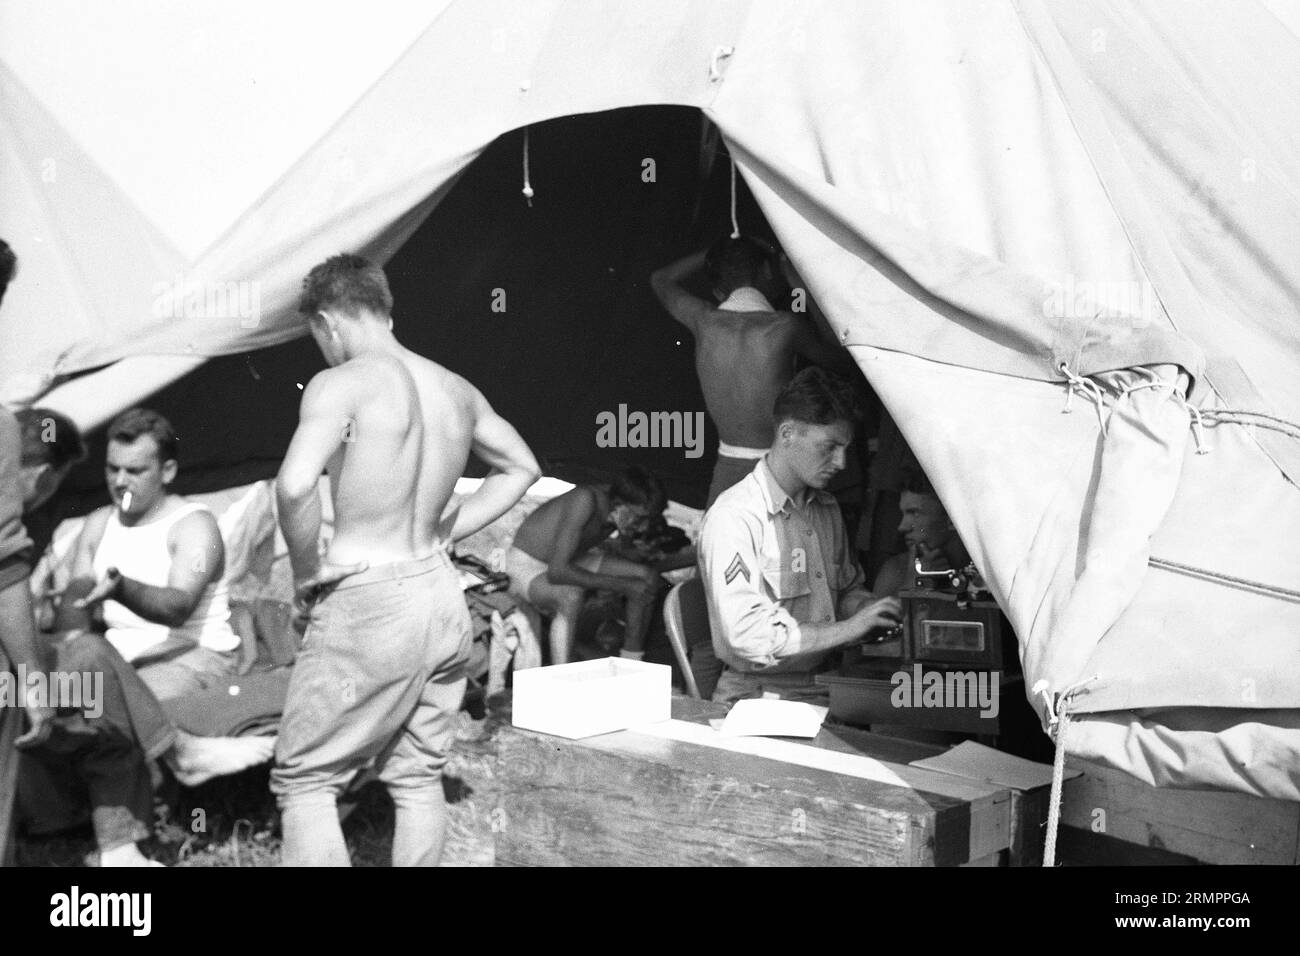 Soldier typing inside tent. Members of the United States Army’s 114th infantry division train to fight against Germany in Europe during WWII. Stock Photo